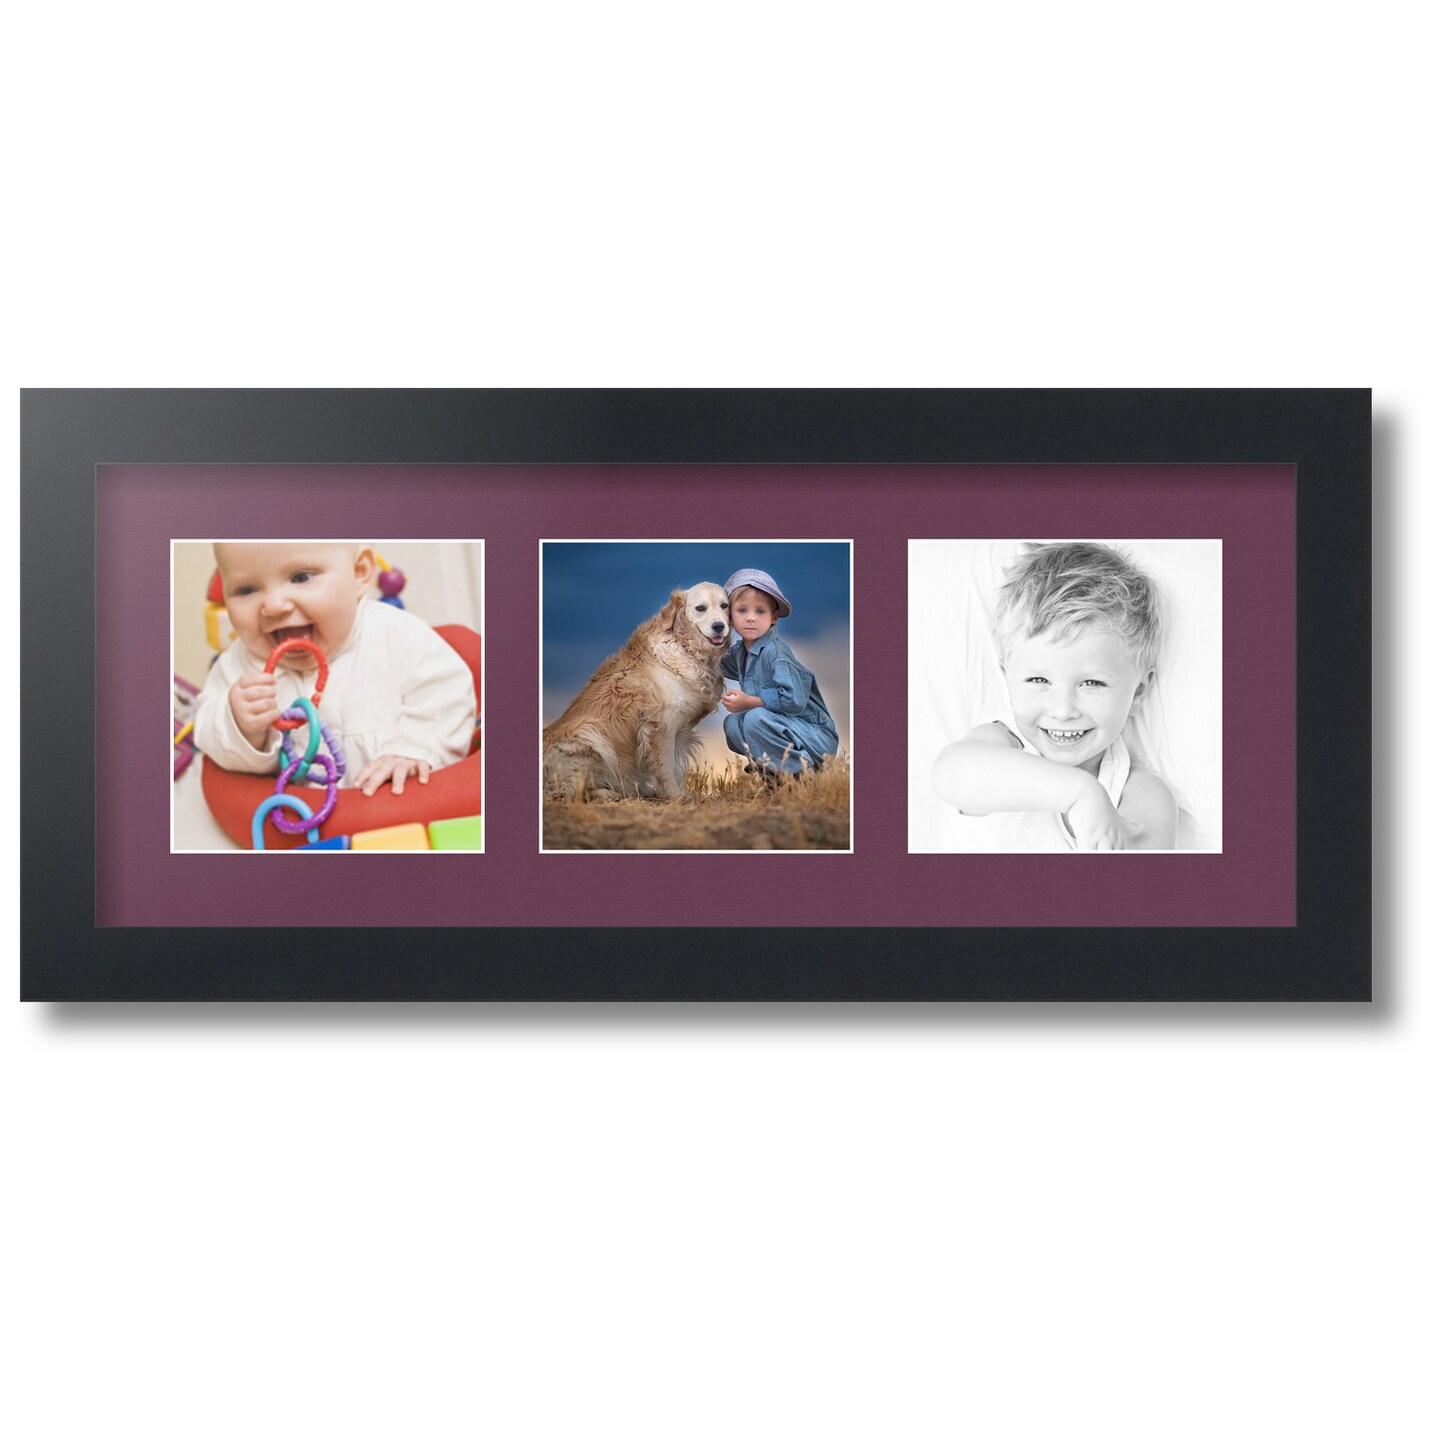 ArtToFrames Collage Photo Picture Frame with 3 - 5x5 inch Openings, Framed in Black with Over 62 Mat Color Options and Regular Glass (CSM-3926-95)